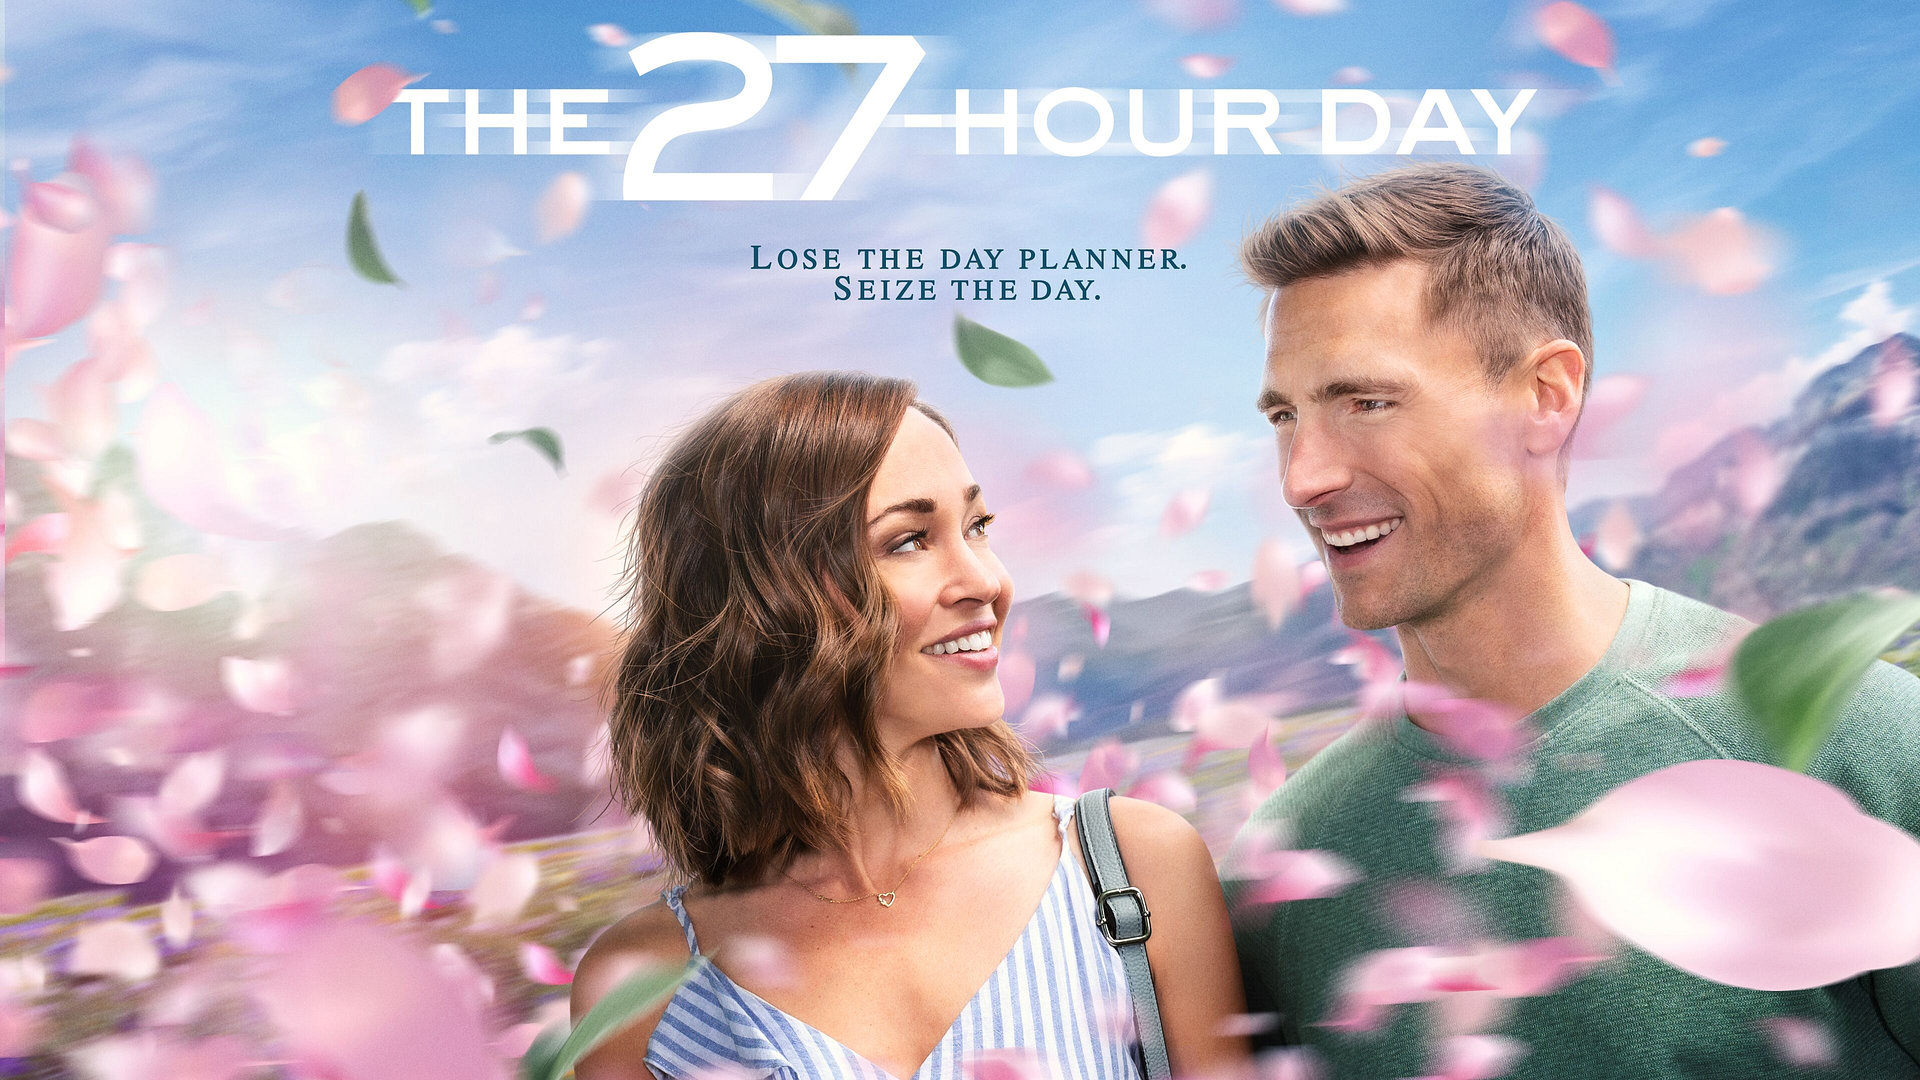 The 27-hour Day